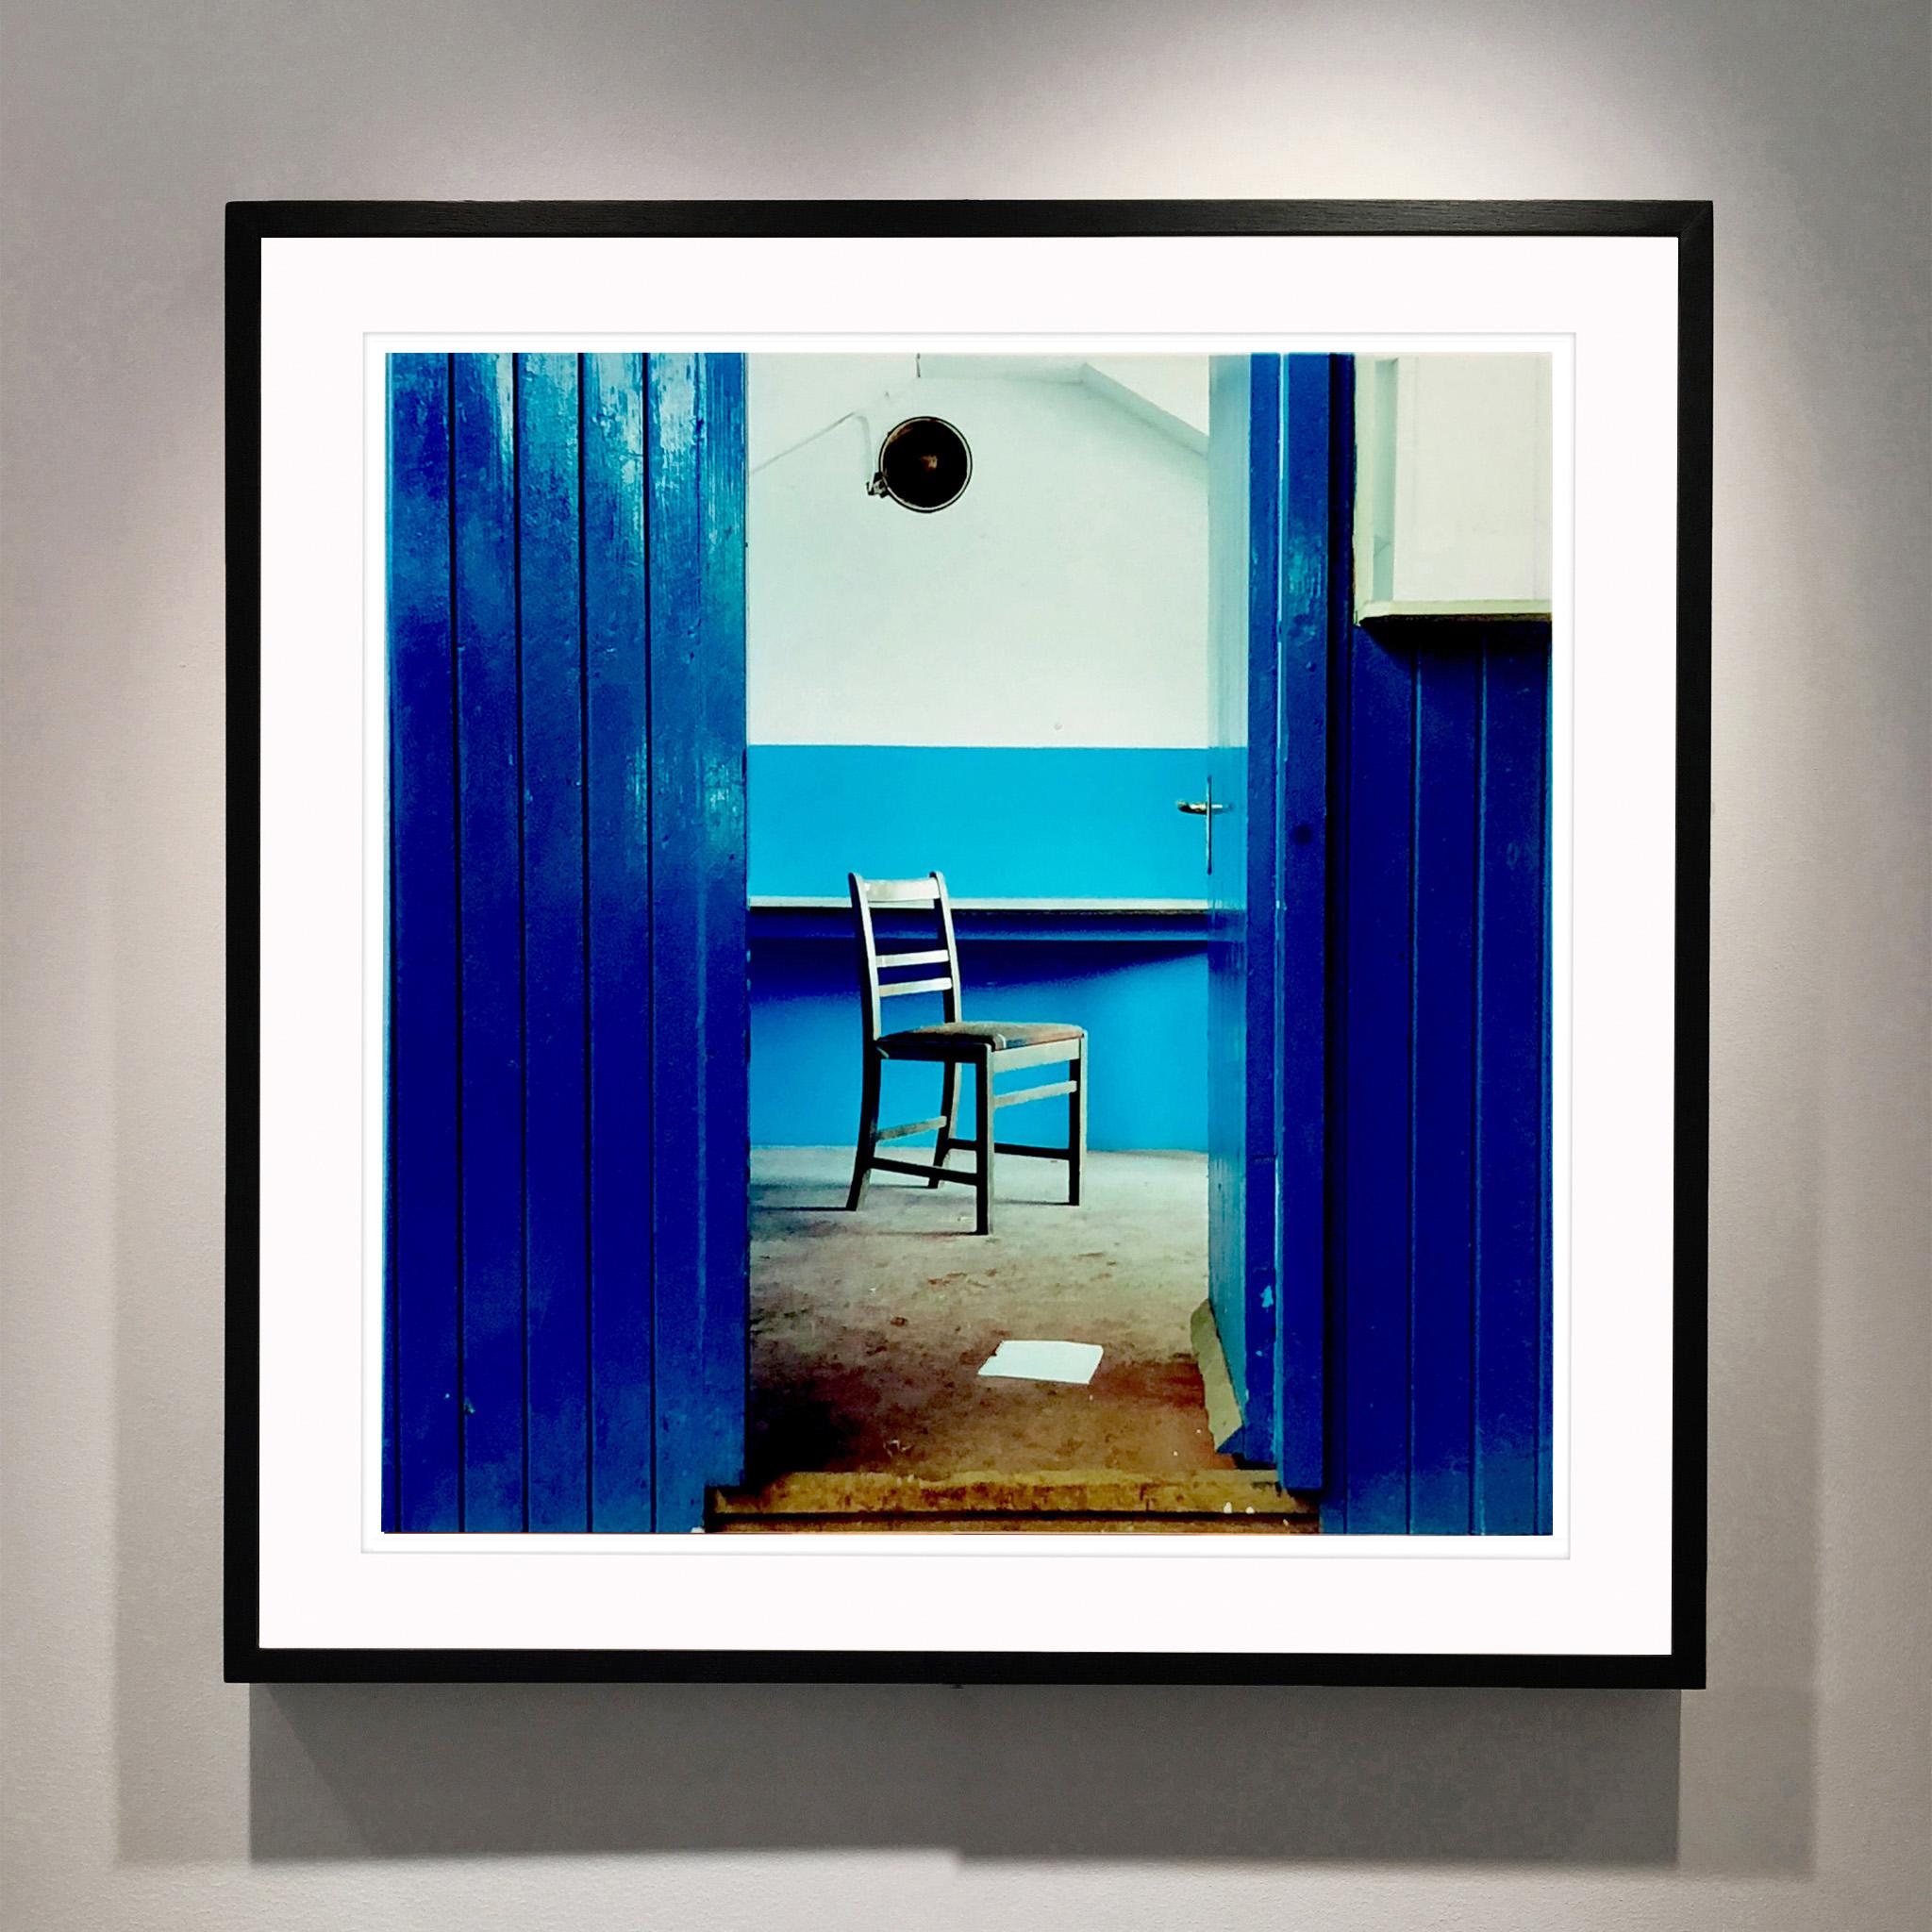 Chair, Northwich - Blue industrial interior photography - Print by Richard Heeps